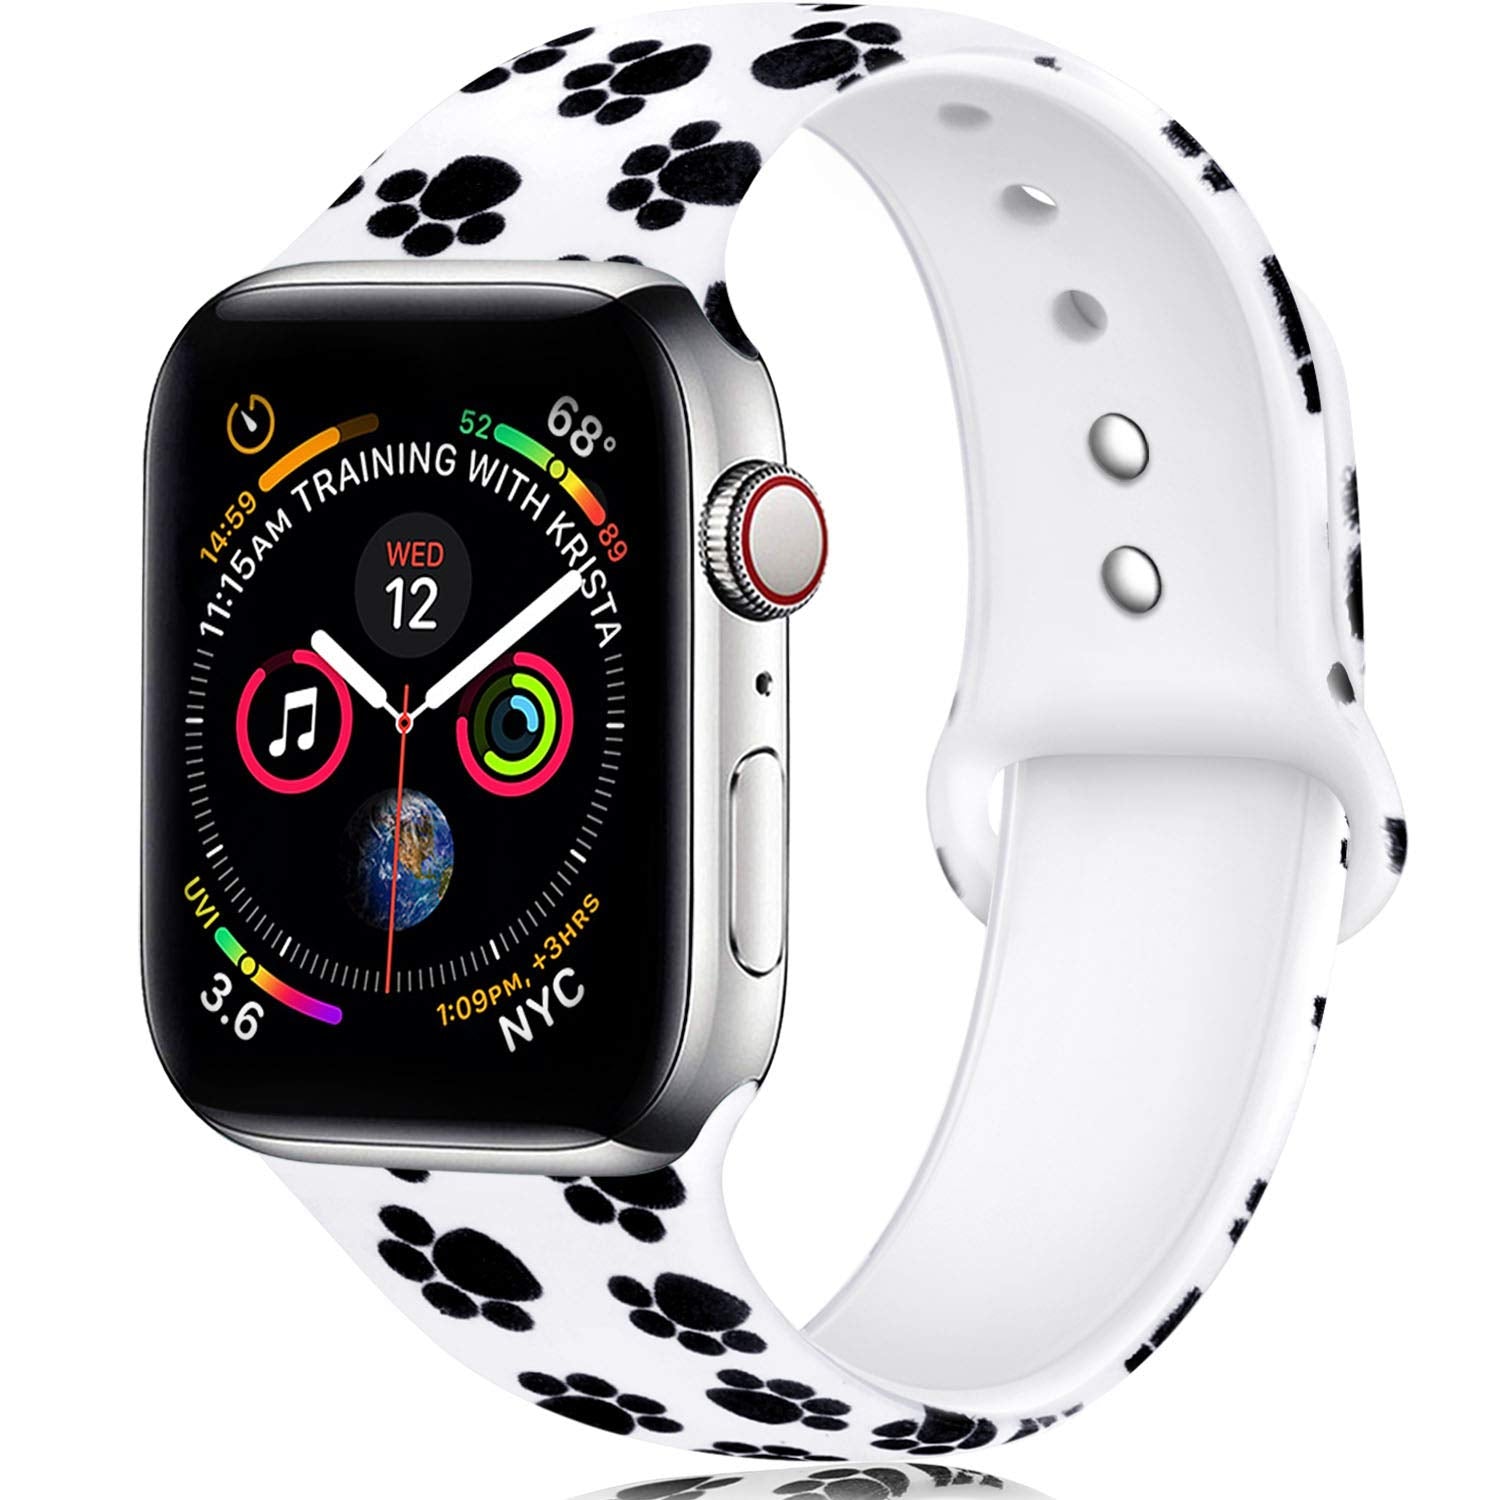  (Cute Dogs Pattern) Patterned Leather Wristband Strap for Apple  Watch Series 4/3/2/1 gen,Replacement for iWatch 42mm / 44mm Bands : Cell  Phones & Accessories